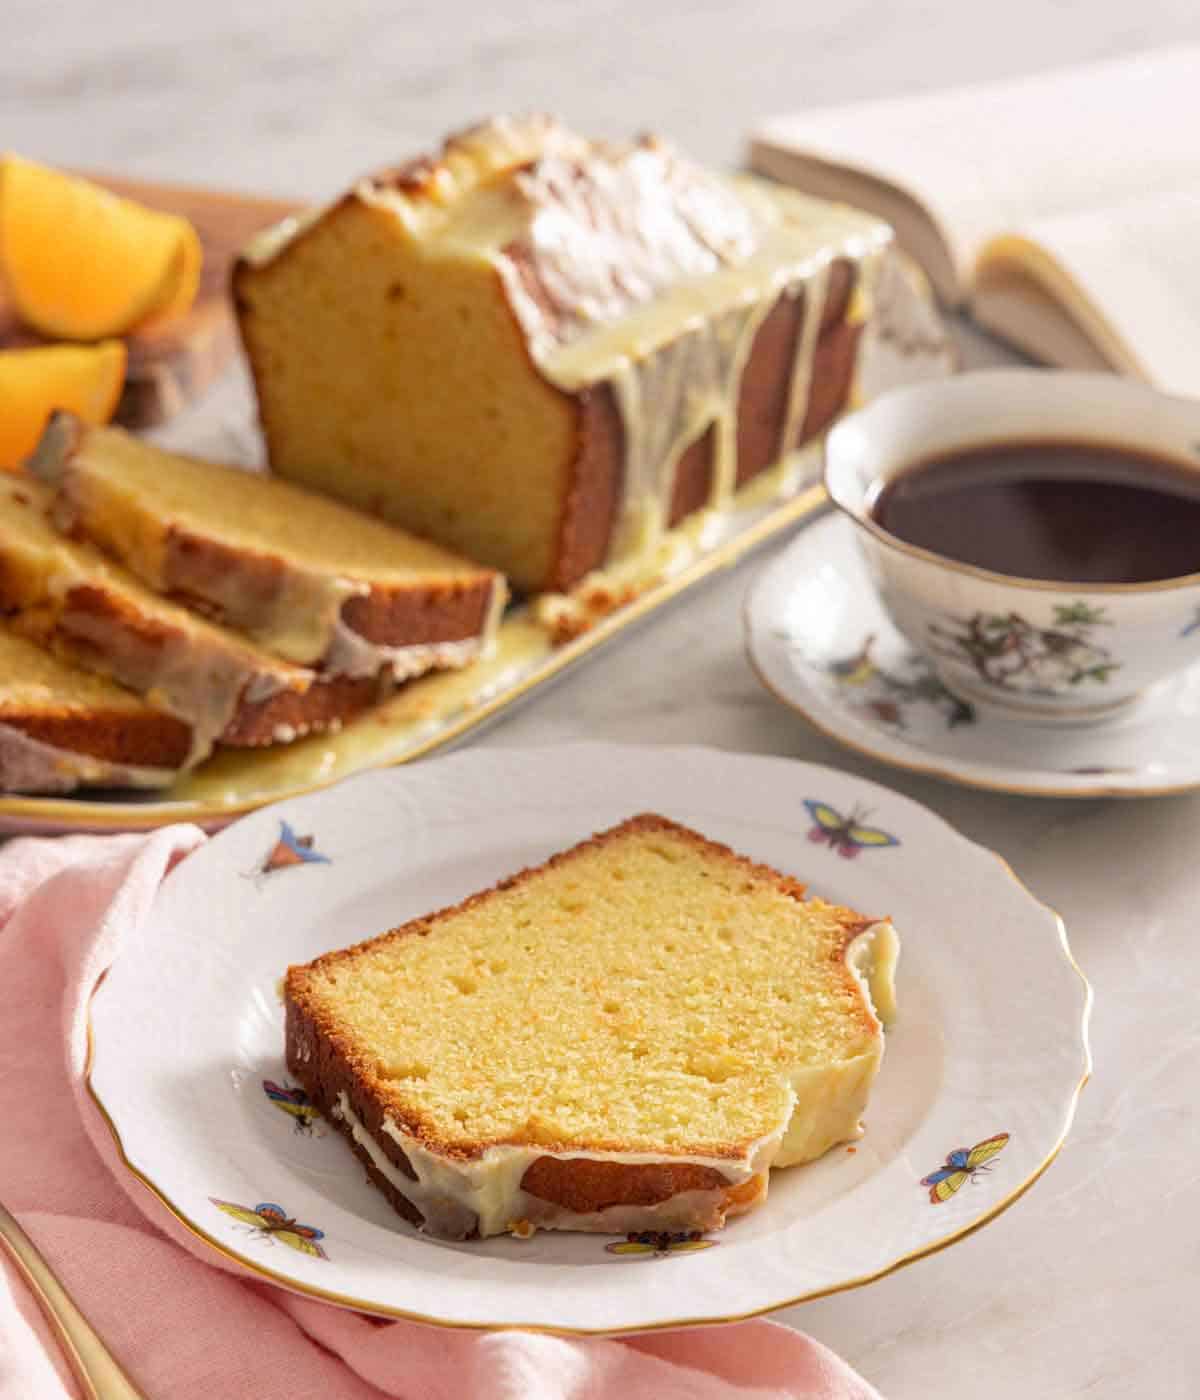 A slice of orange cake in a plate in front of a platter with the rest of the loaf and coffee.